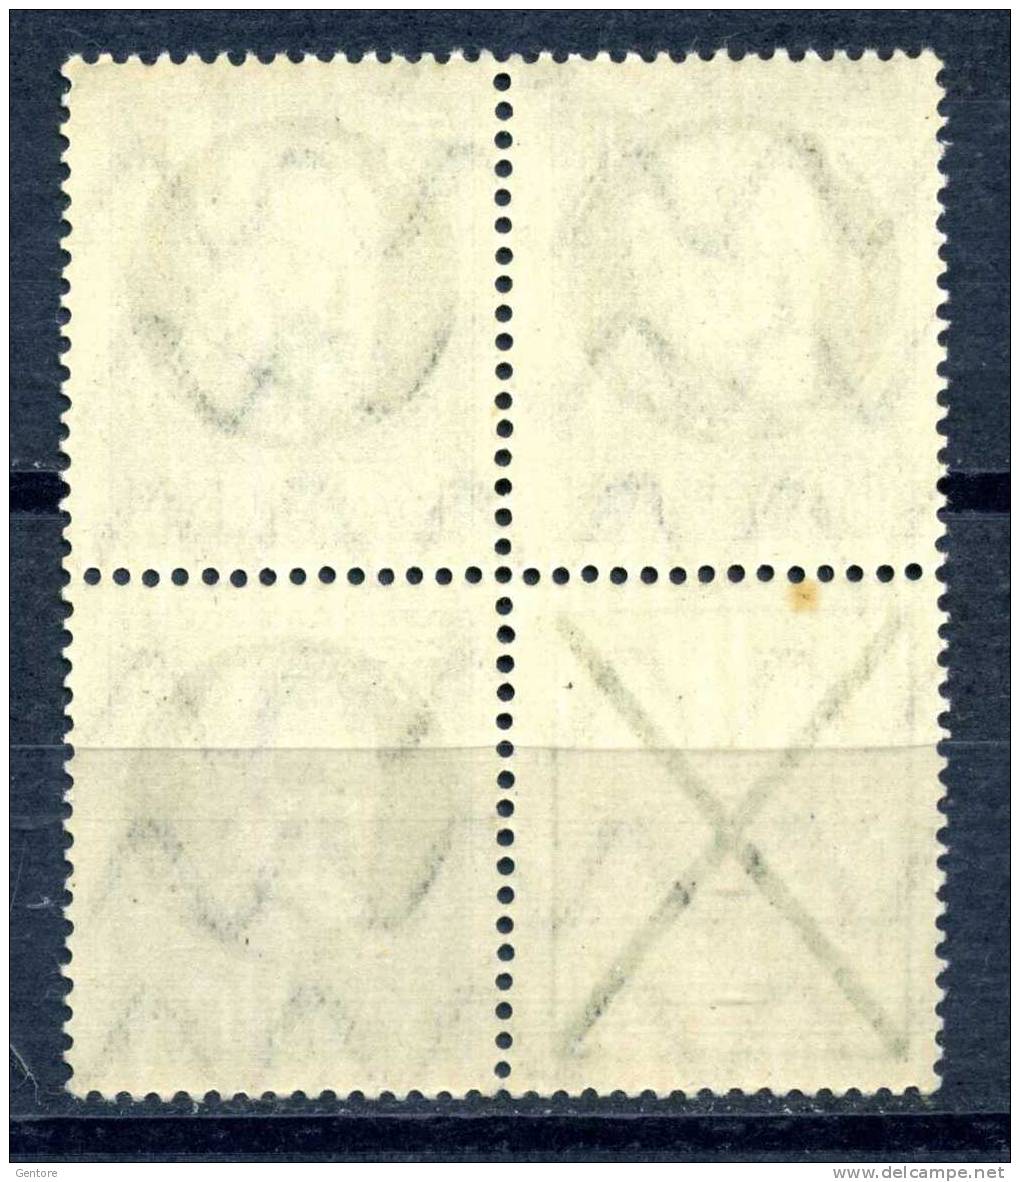 BAVARIA  1914  BOOKLET Michel Cat. N° S 17  Mint Never Hinged (small Brown Spot On The Gum) - Neufs